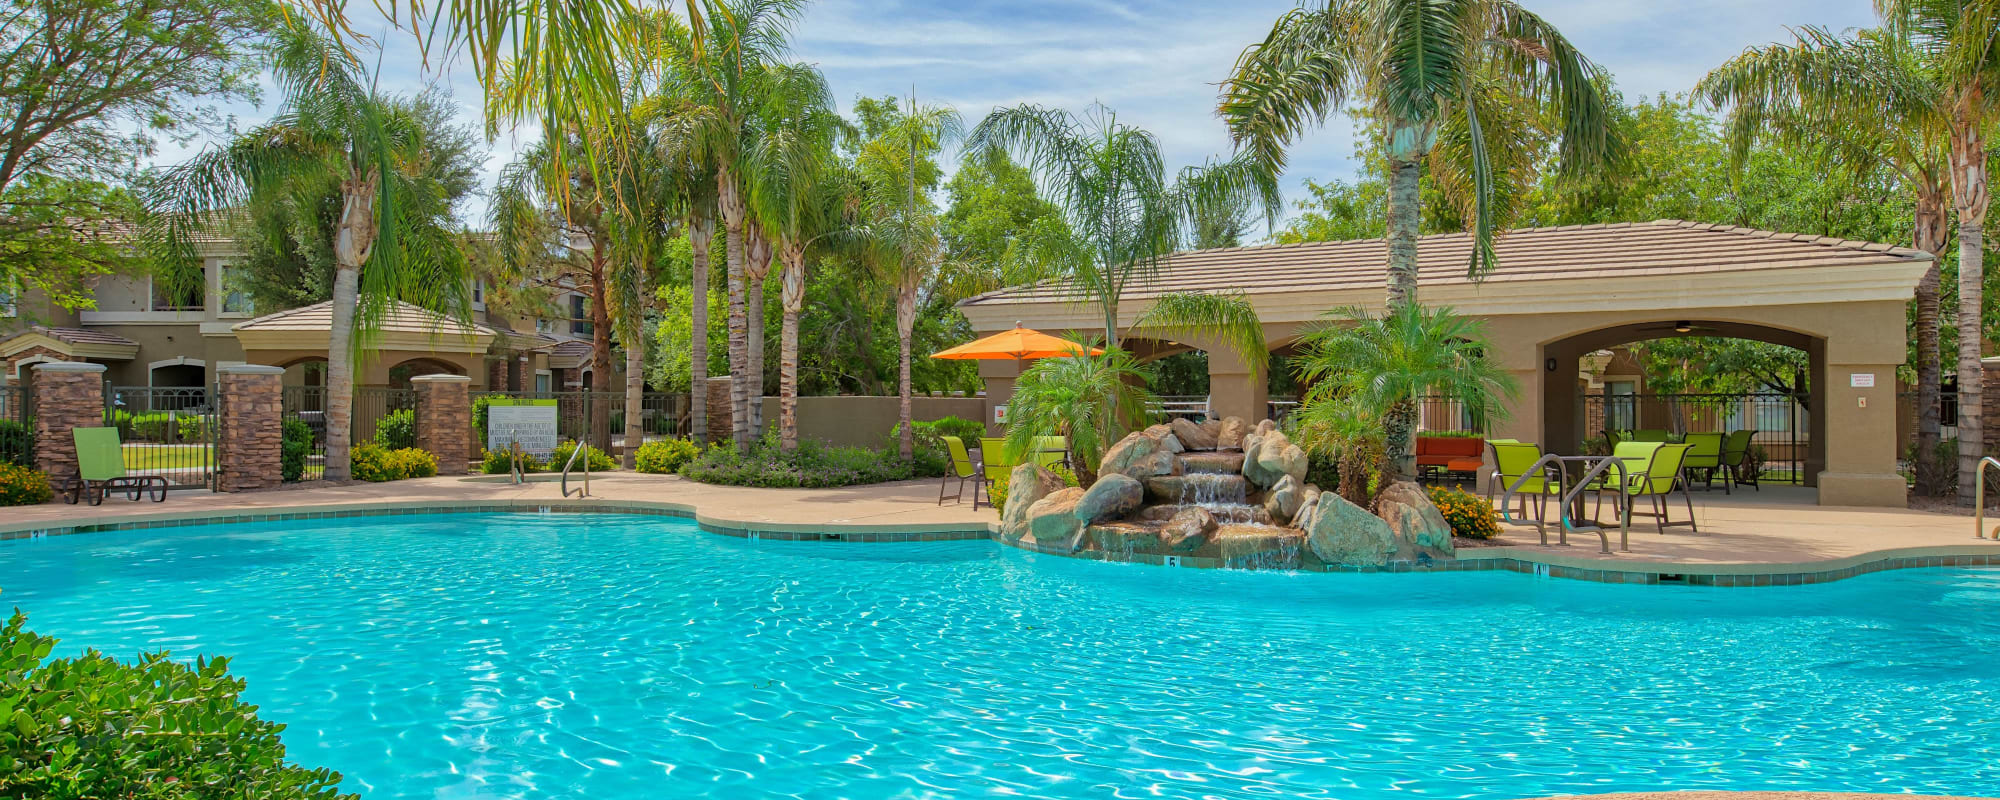 Schedule a tour of The Palms at Augusta Ranch Apartments in Mesa, Arizona